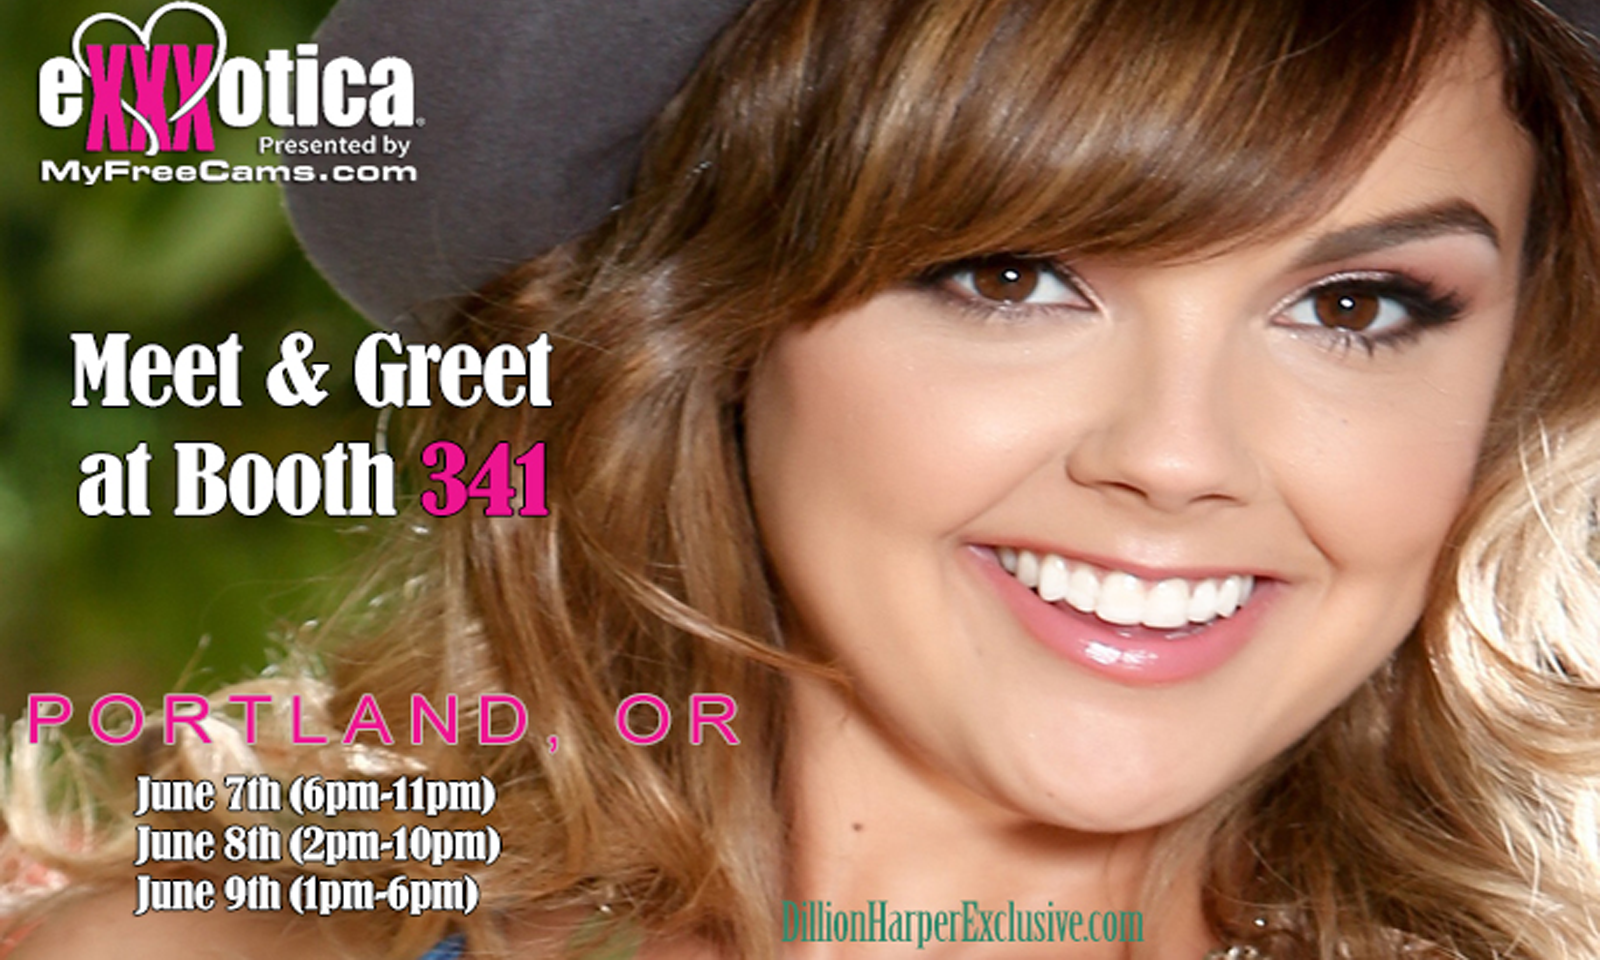 Dillion Harper is Heading to Exxxotica Portland This Weekend